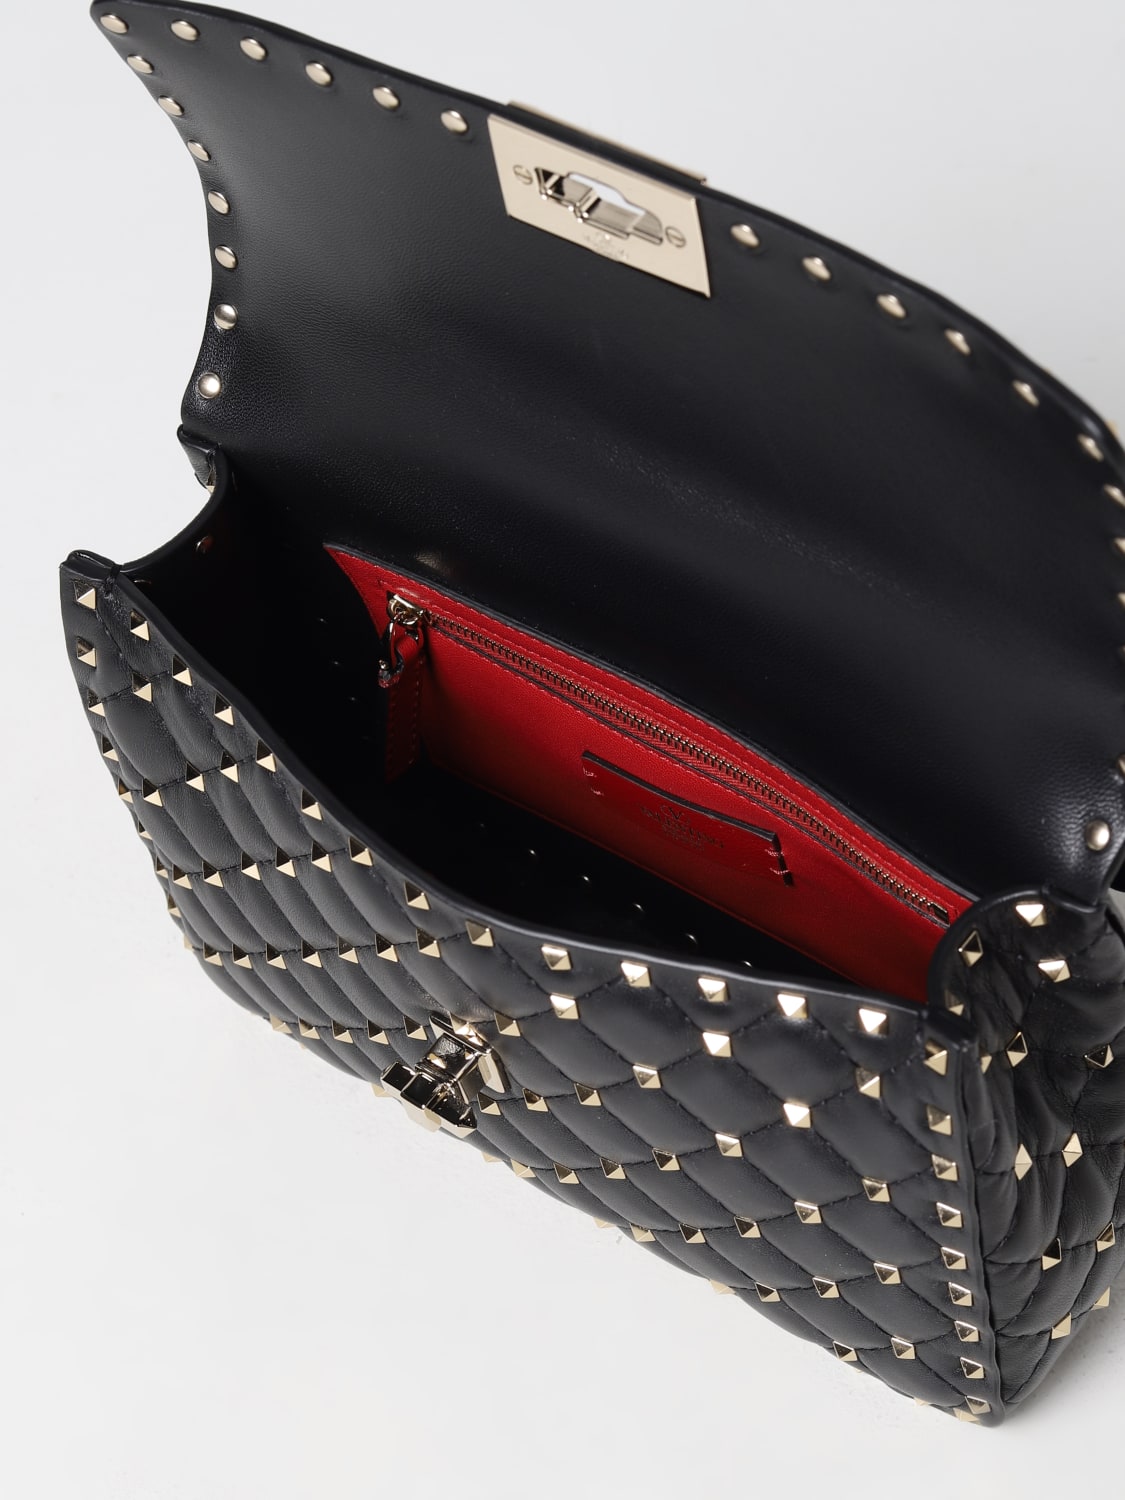 Valentino Red Leather Rockstud Spike Small Crossbody Bag